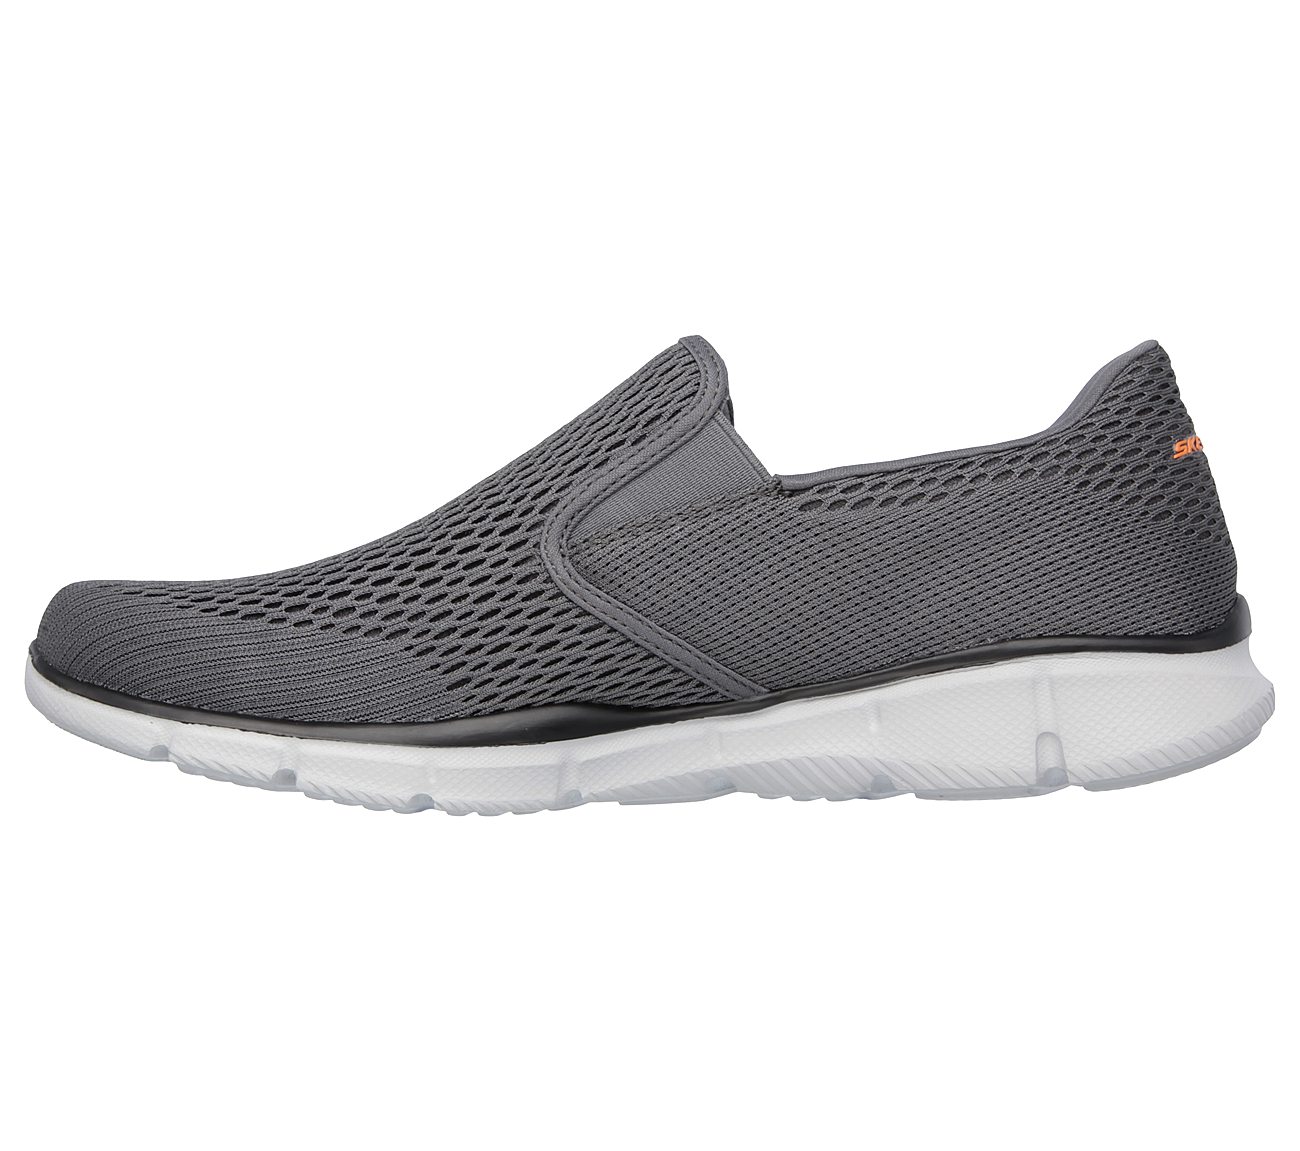 EQUALIZER- DOUBLE PLAY, CHARCOAL/ORANGE Footwear Left View